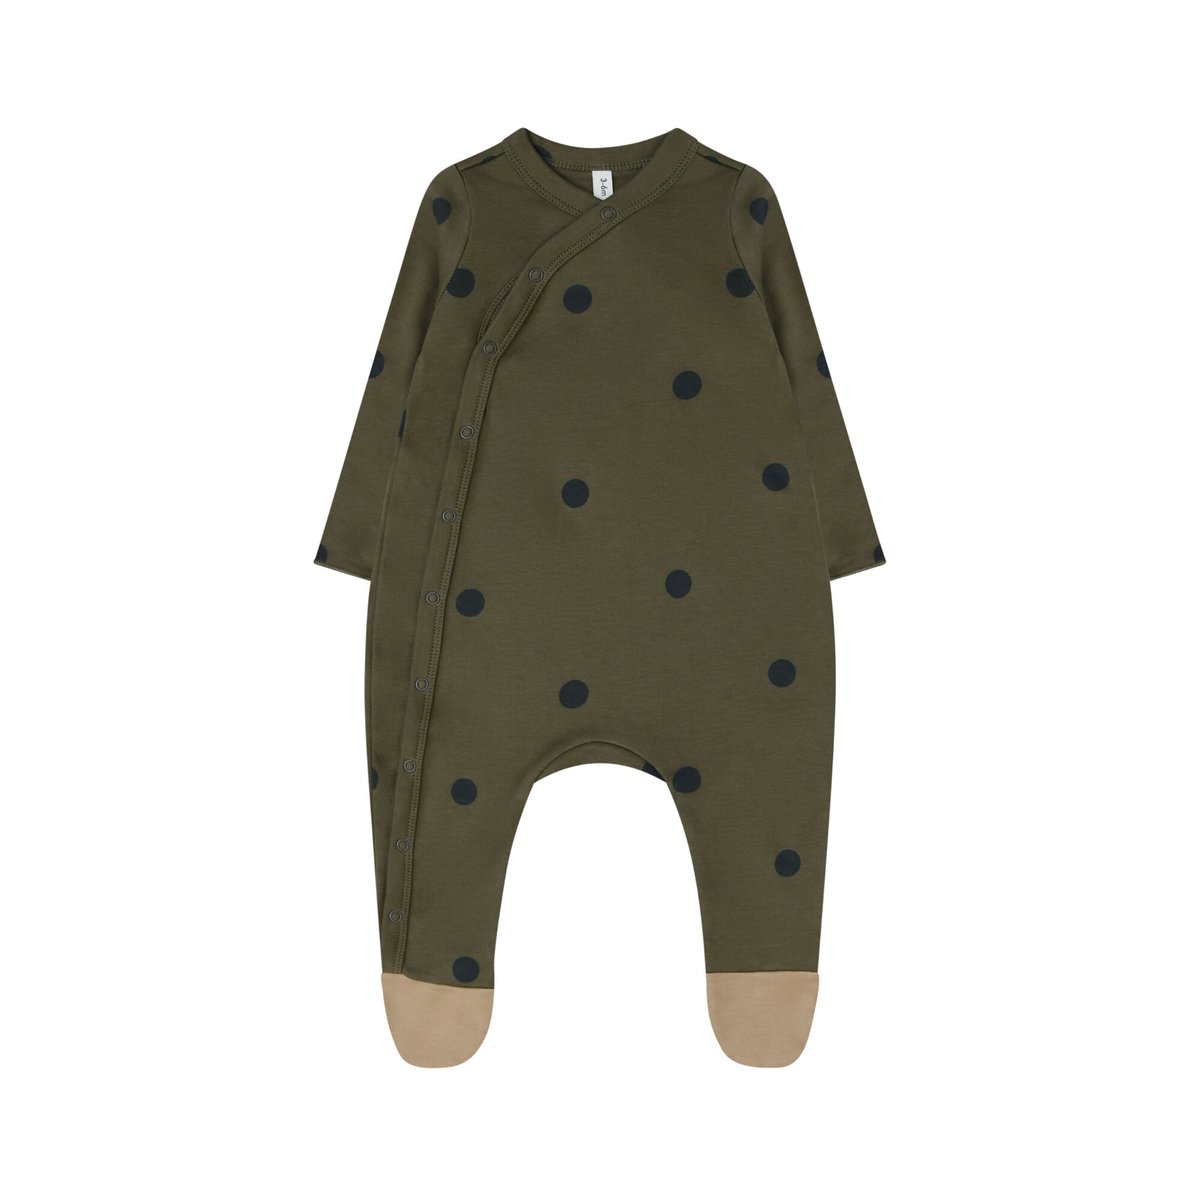 Organic zoo - Olive Dots Suit w/ contrast feet （0M-12M）